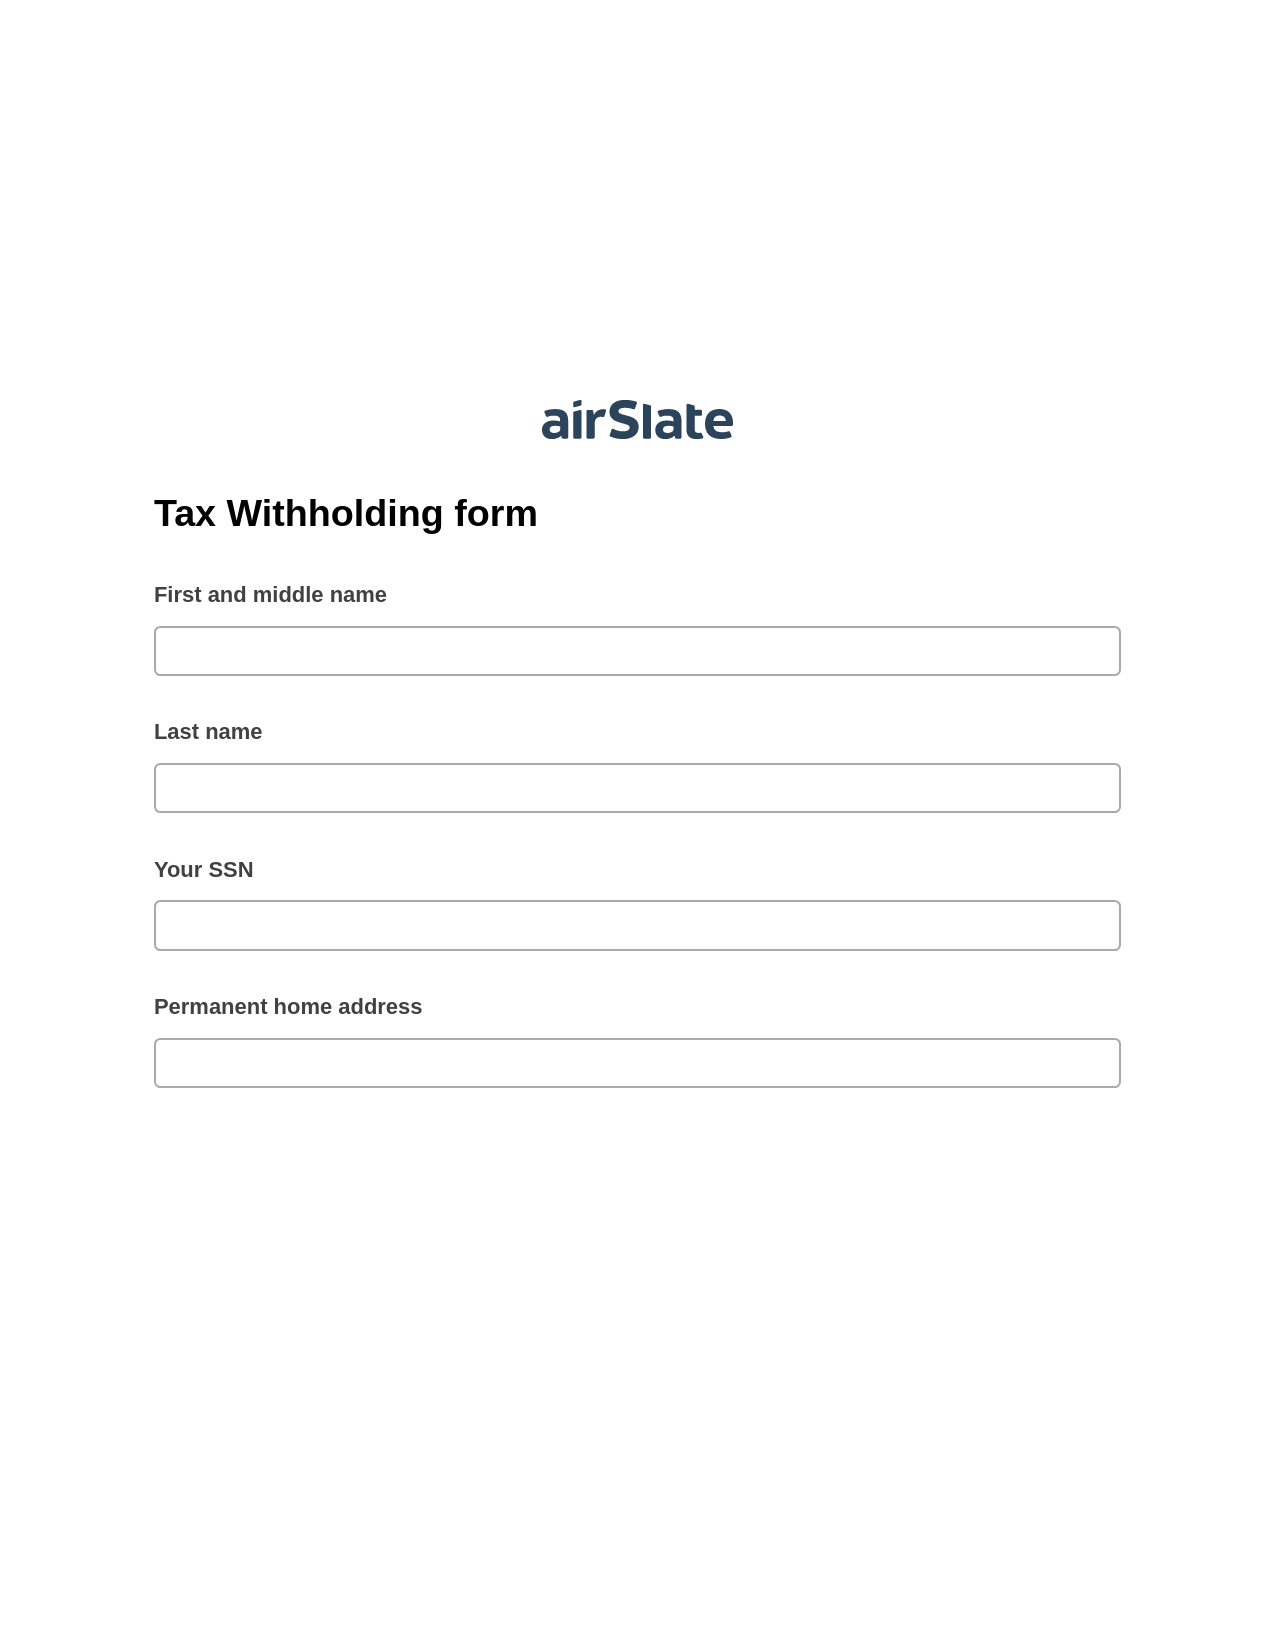 Tax Withholding form Pre-fill from NetSuite Records Bot, Document Hide Bot, Export to Smartsheet Bot